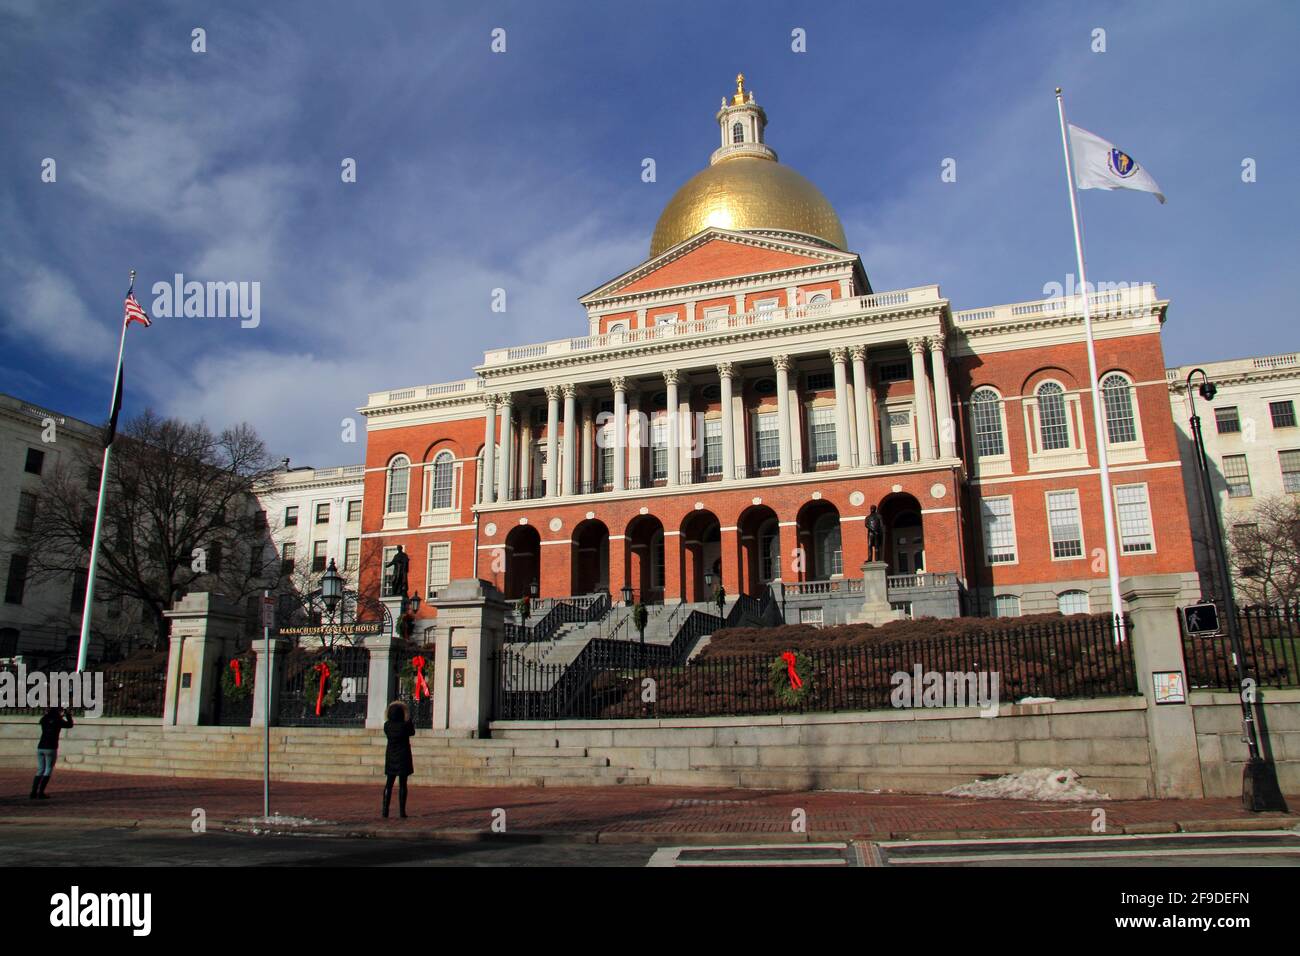 The Massachusetts State House is a popular stop along the Freedom Trail in Boston, Massachusetts December 22, 2019 in Boston, Massachusetts Stock Photo